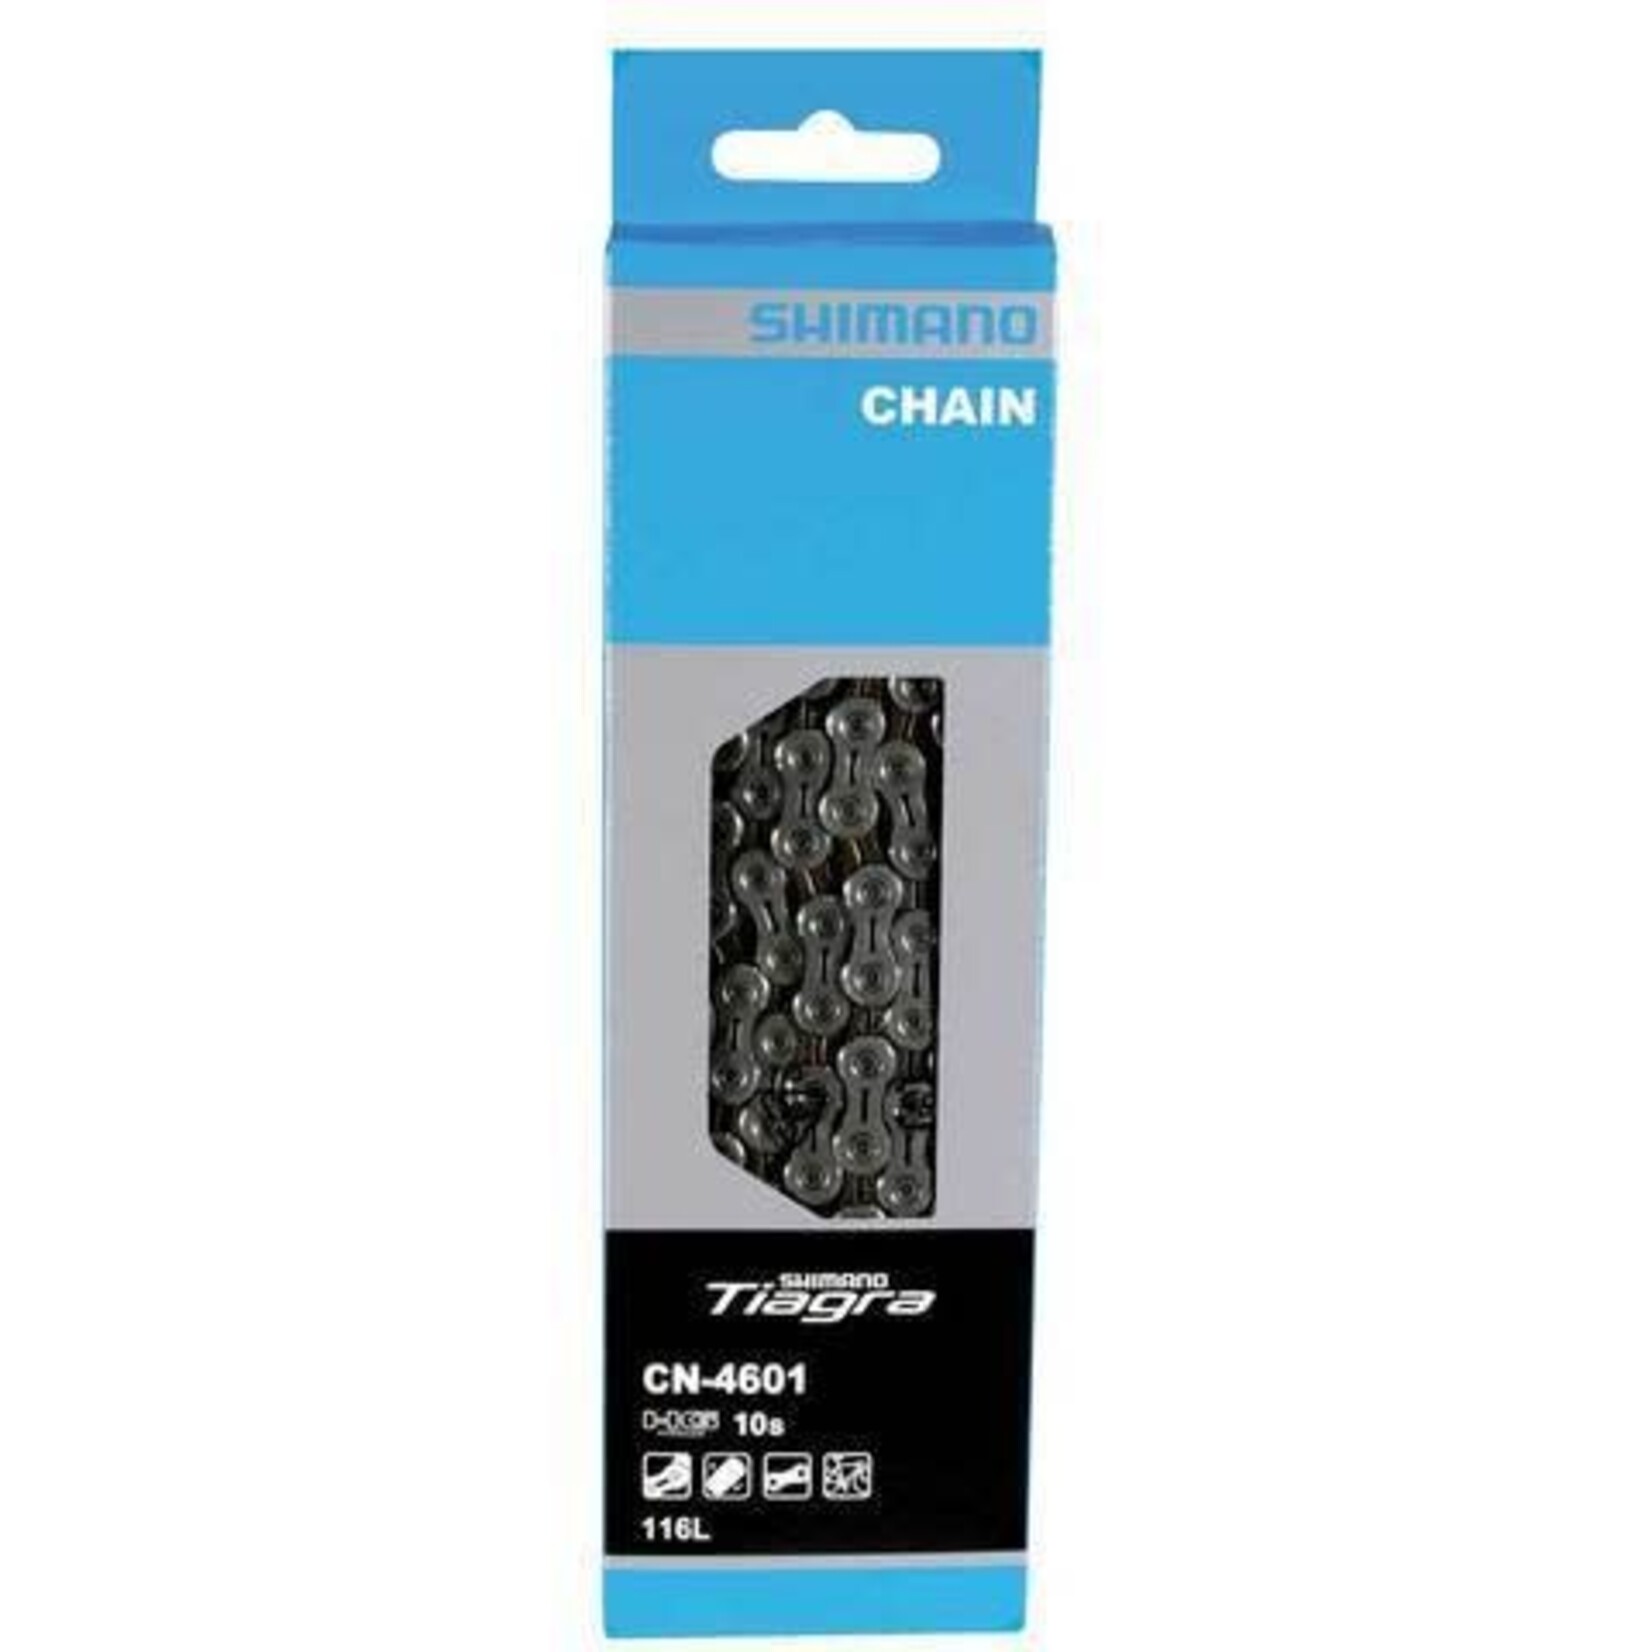 Shimano BICYCLE CHAIN, CN-4601, TIAGRA, FOR 10-SPEED, 116 LINKS, CONNECT PIN X 1